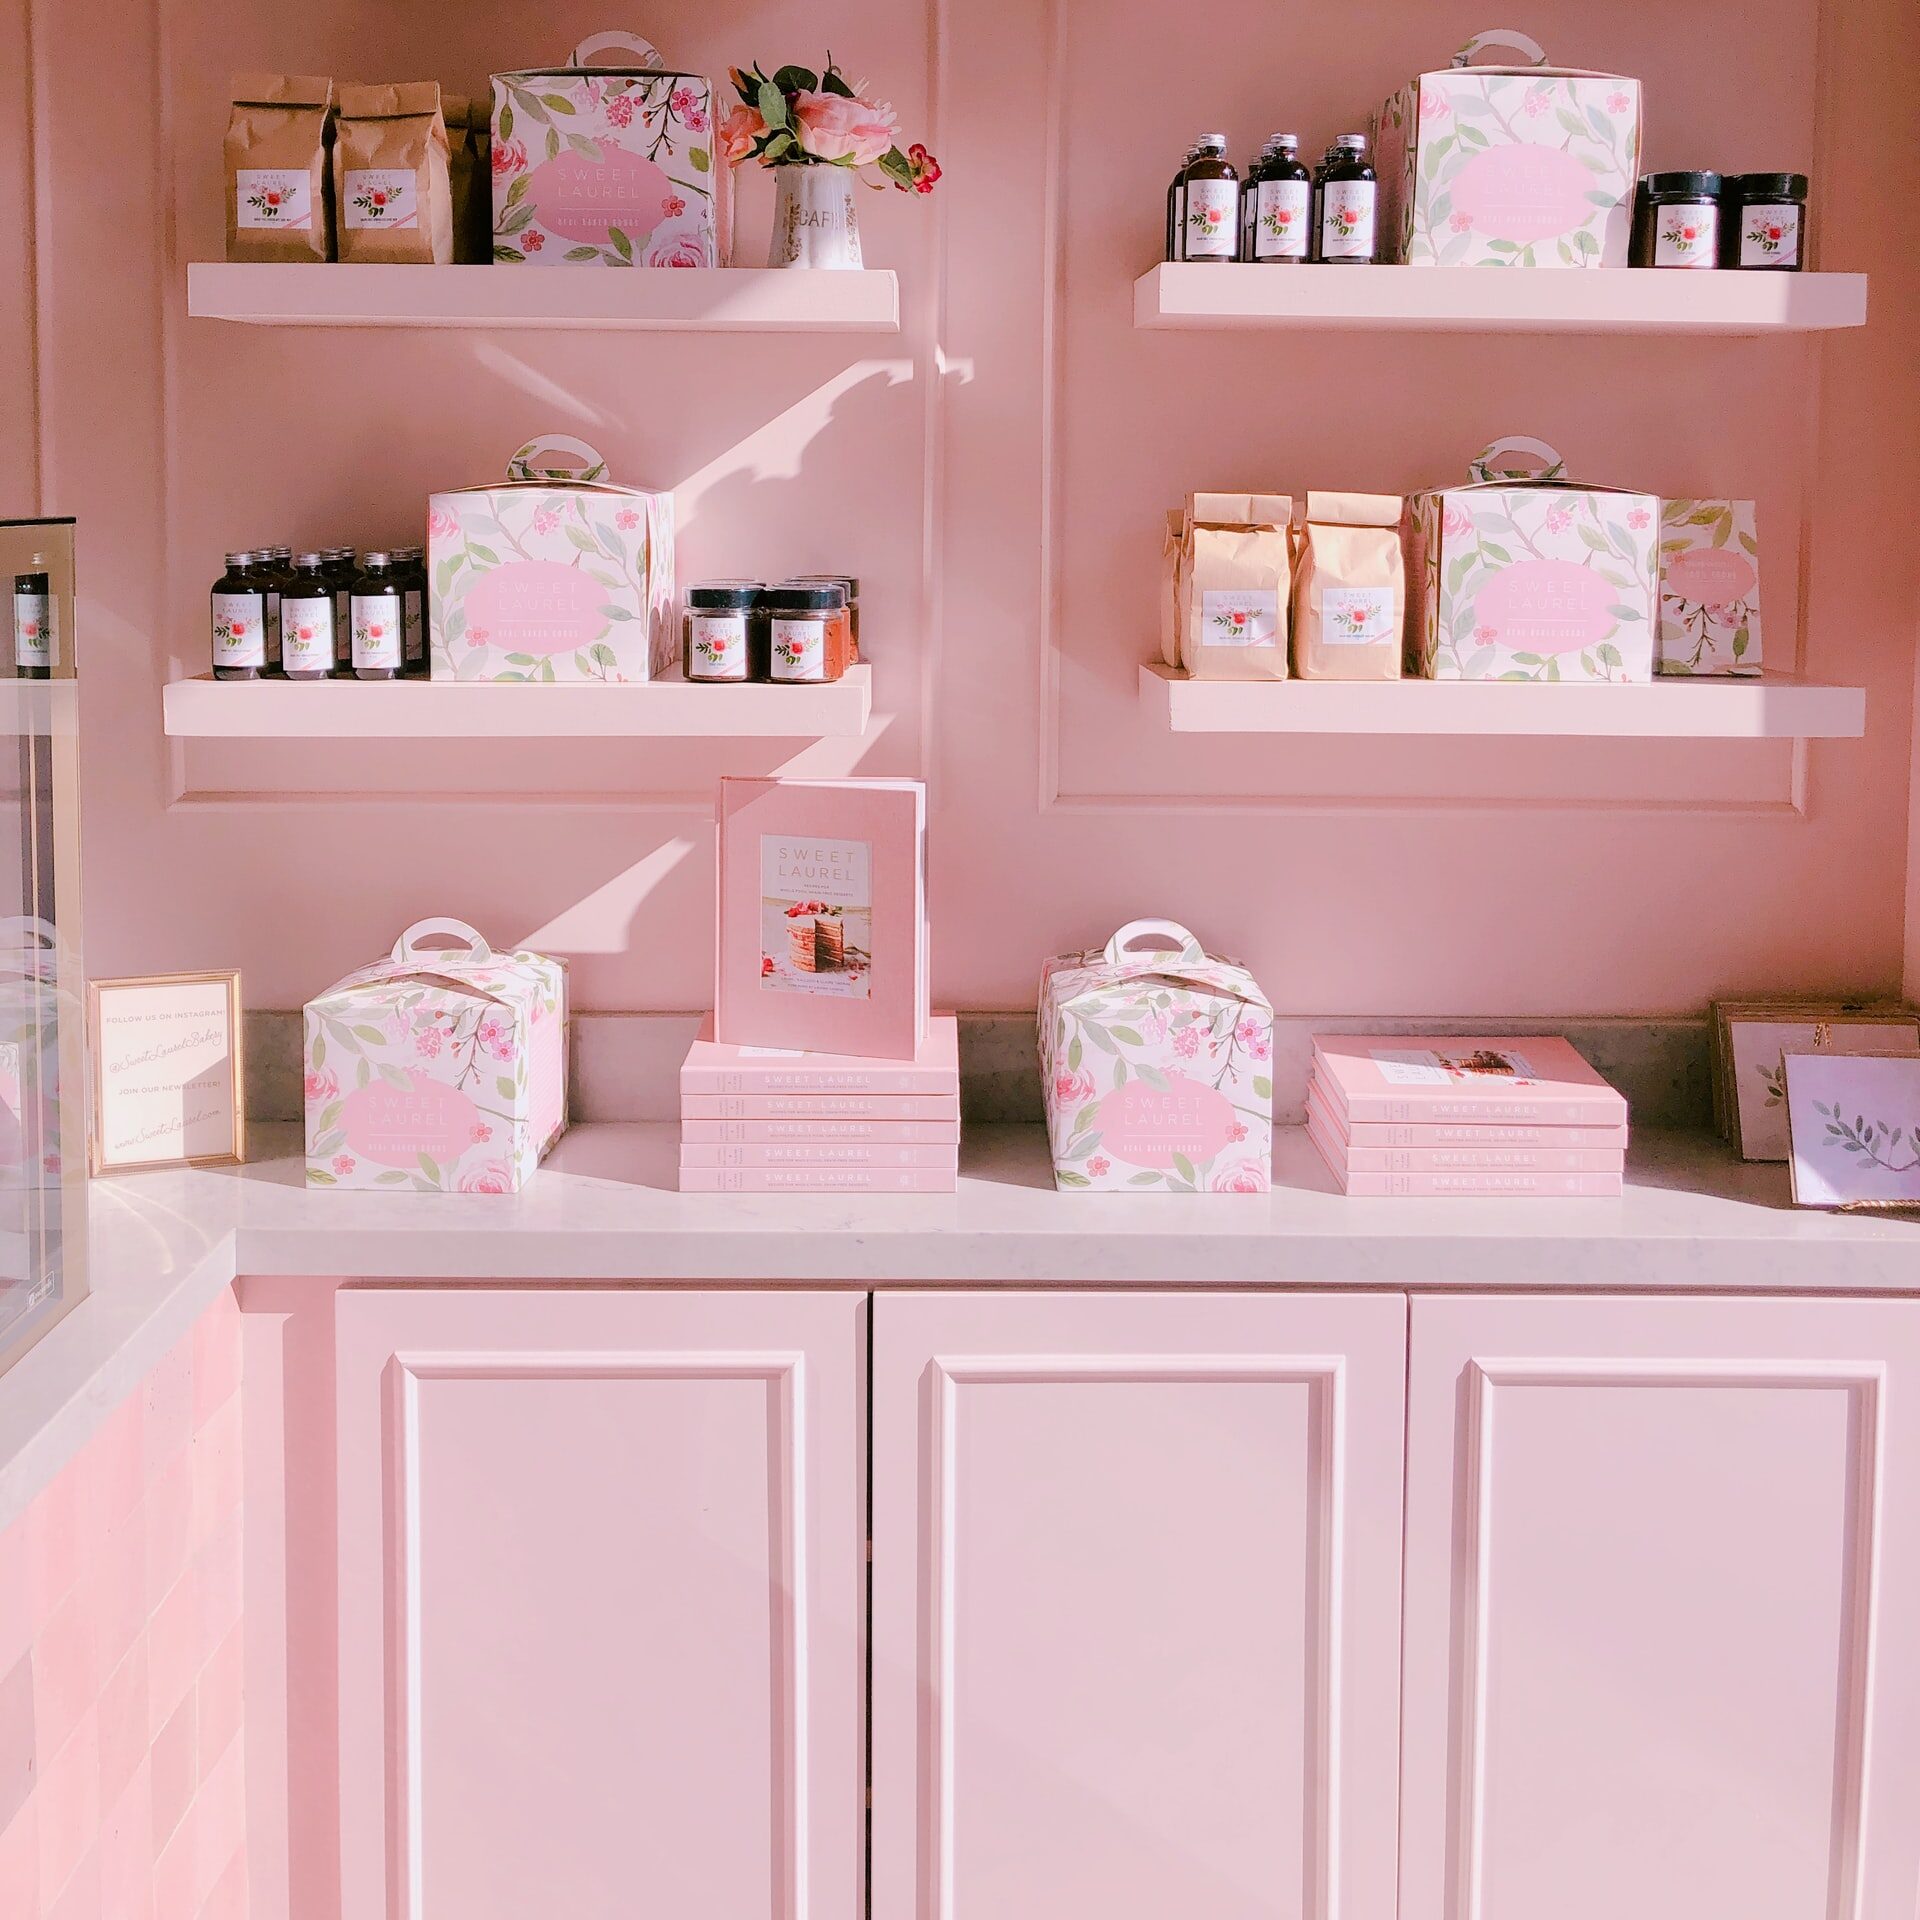 aesthetic pink colorful kitchen cabinets